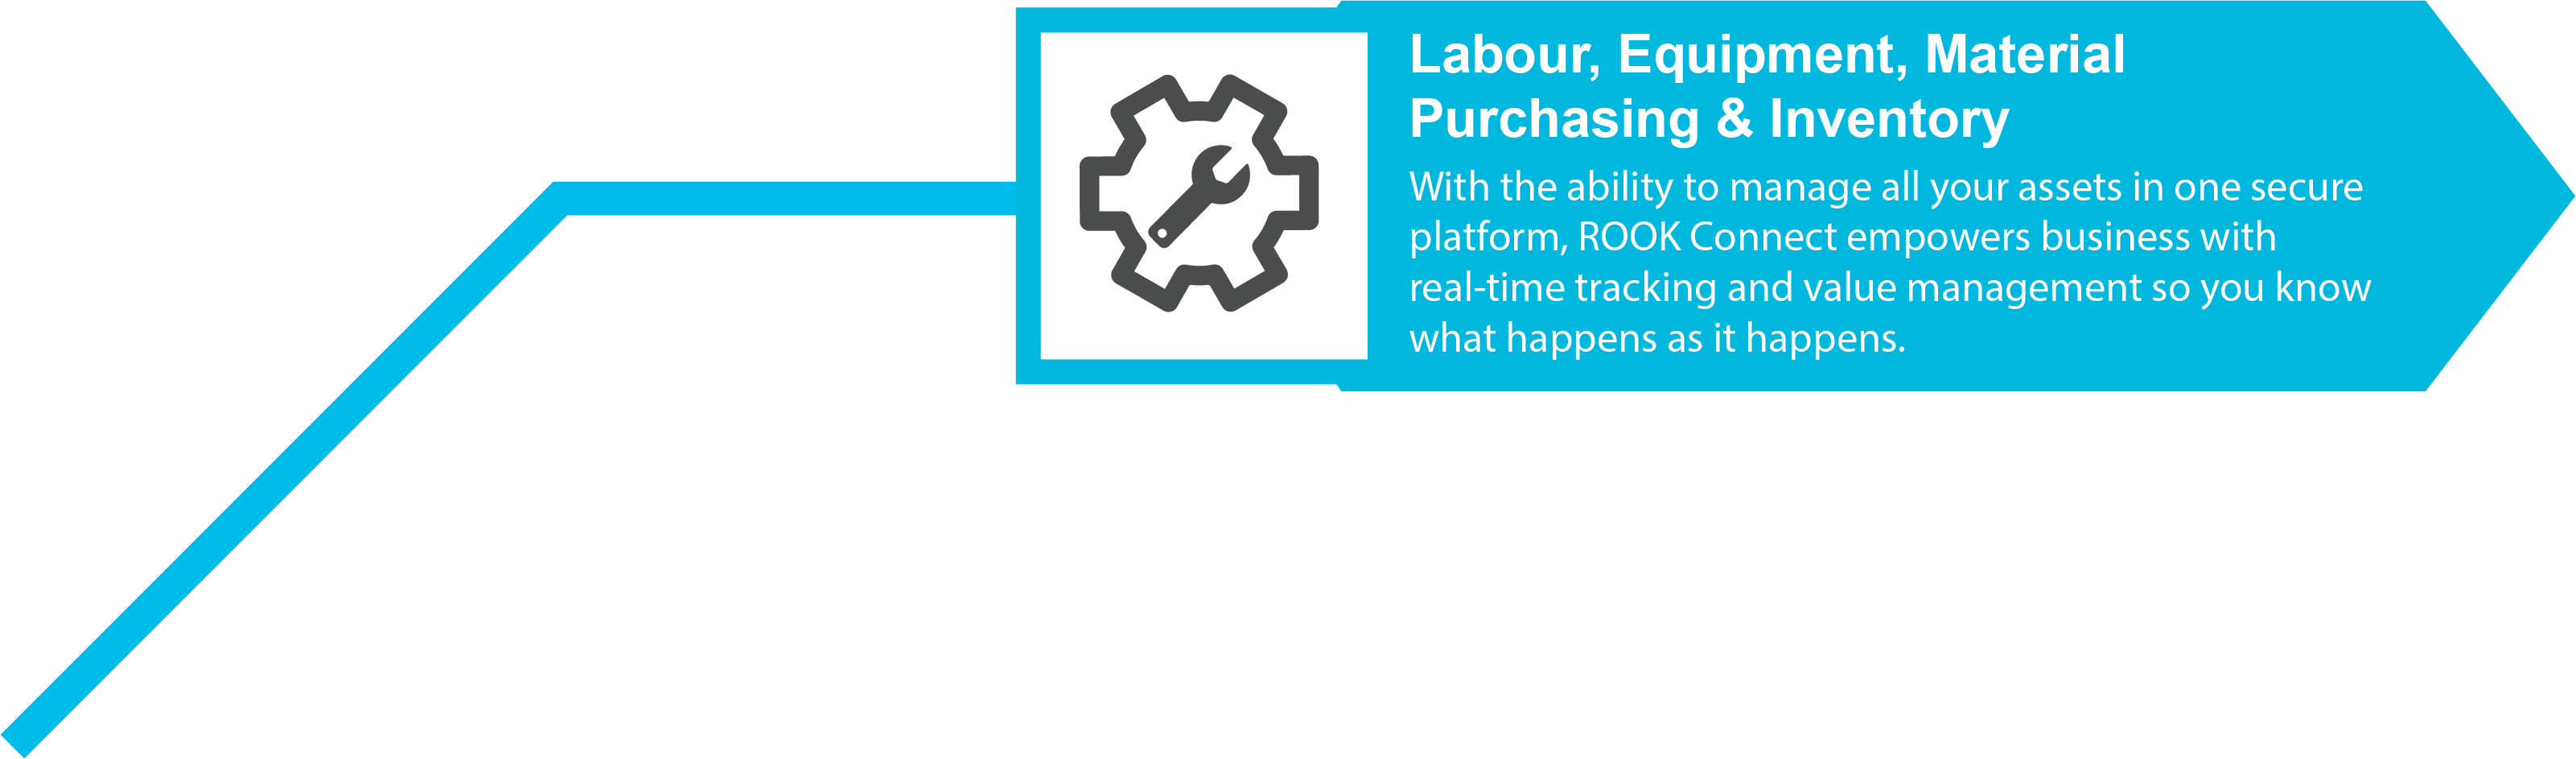 Labour, Equipment, Material Purchasing & Inventory